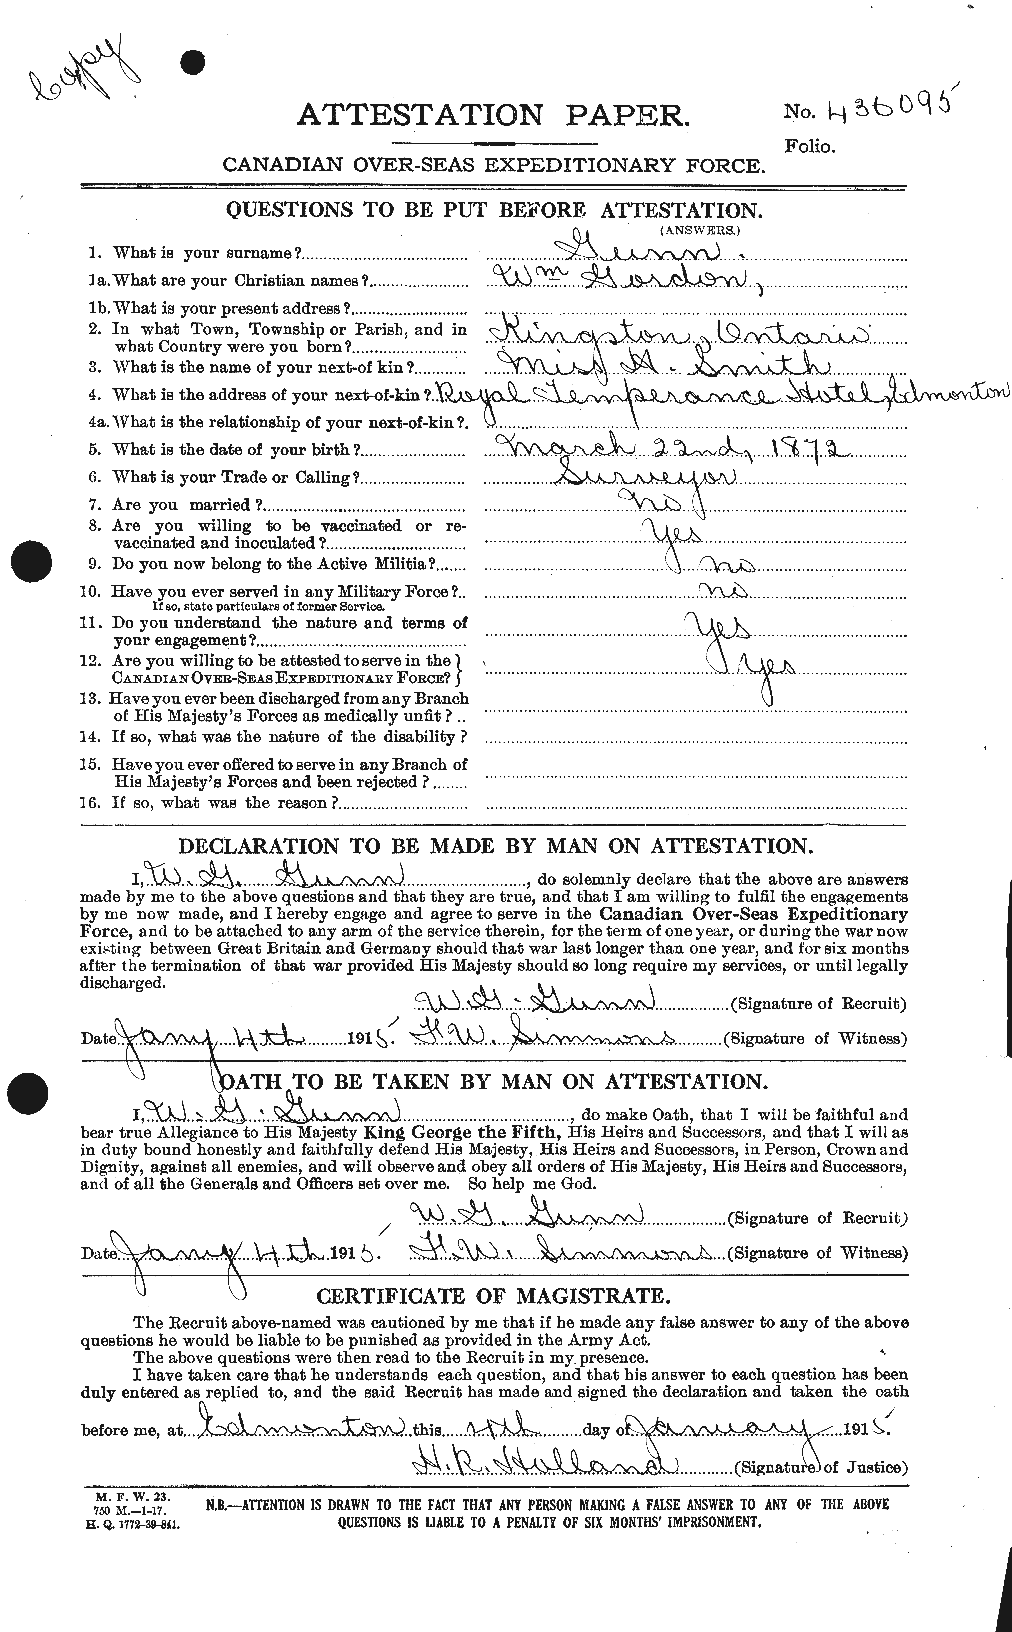 Personnel Records of the First World War - CEF 369368a